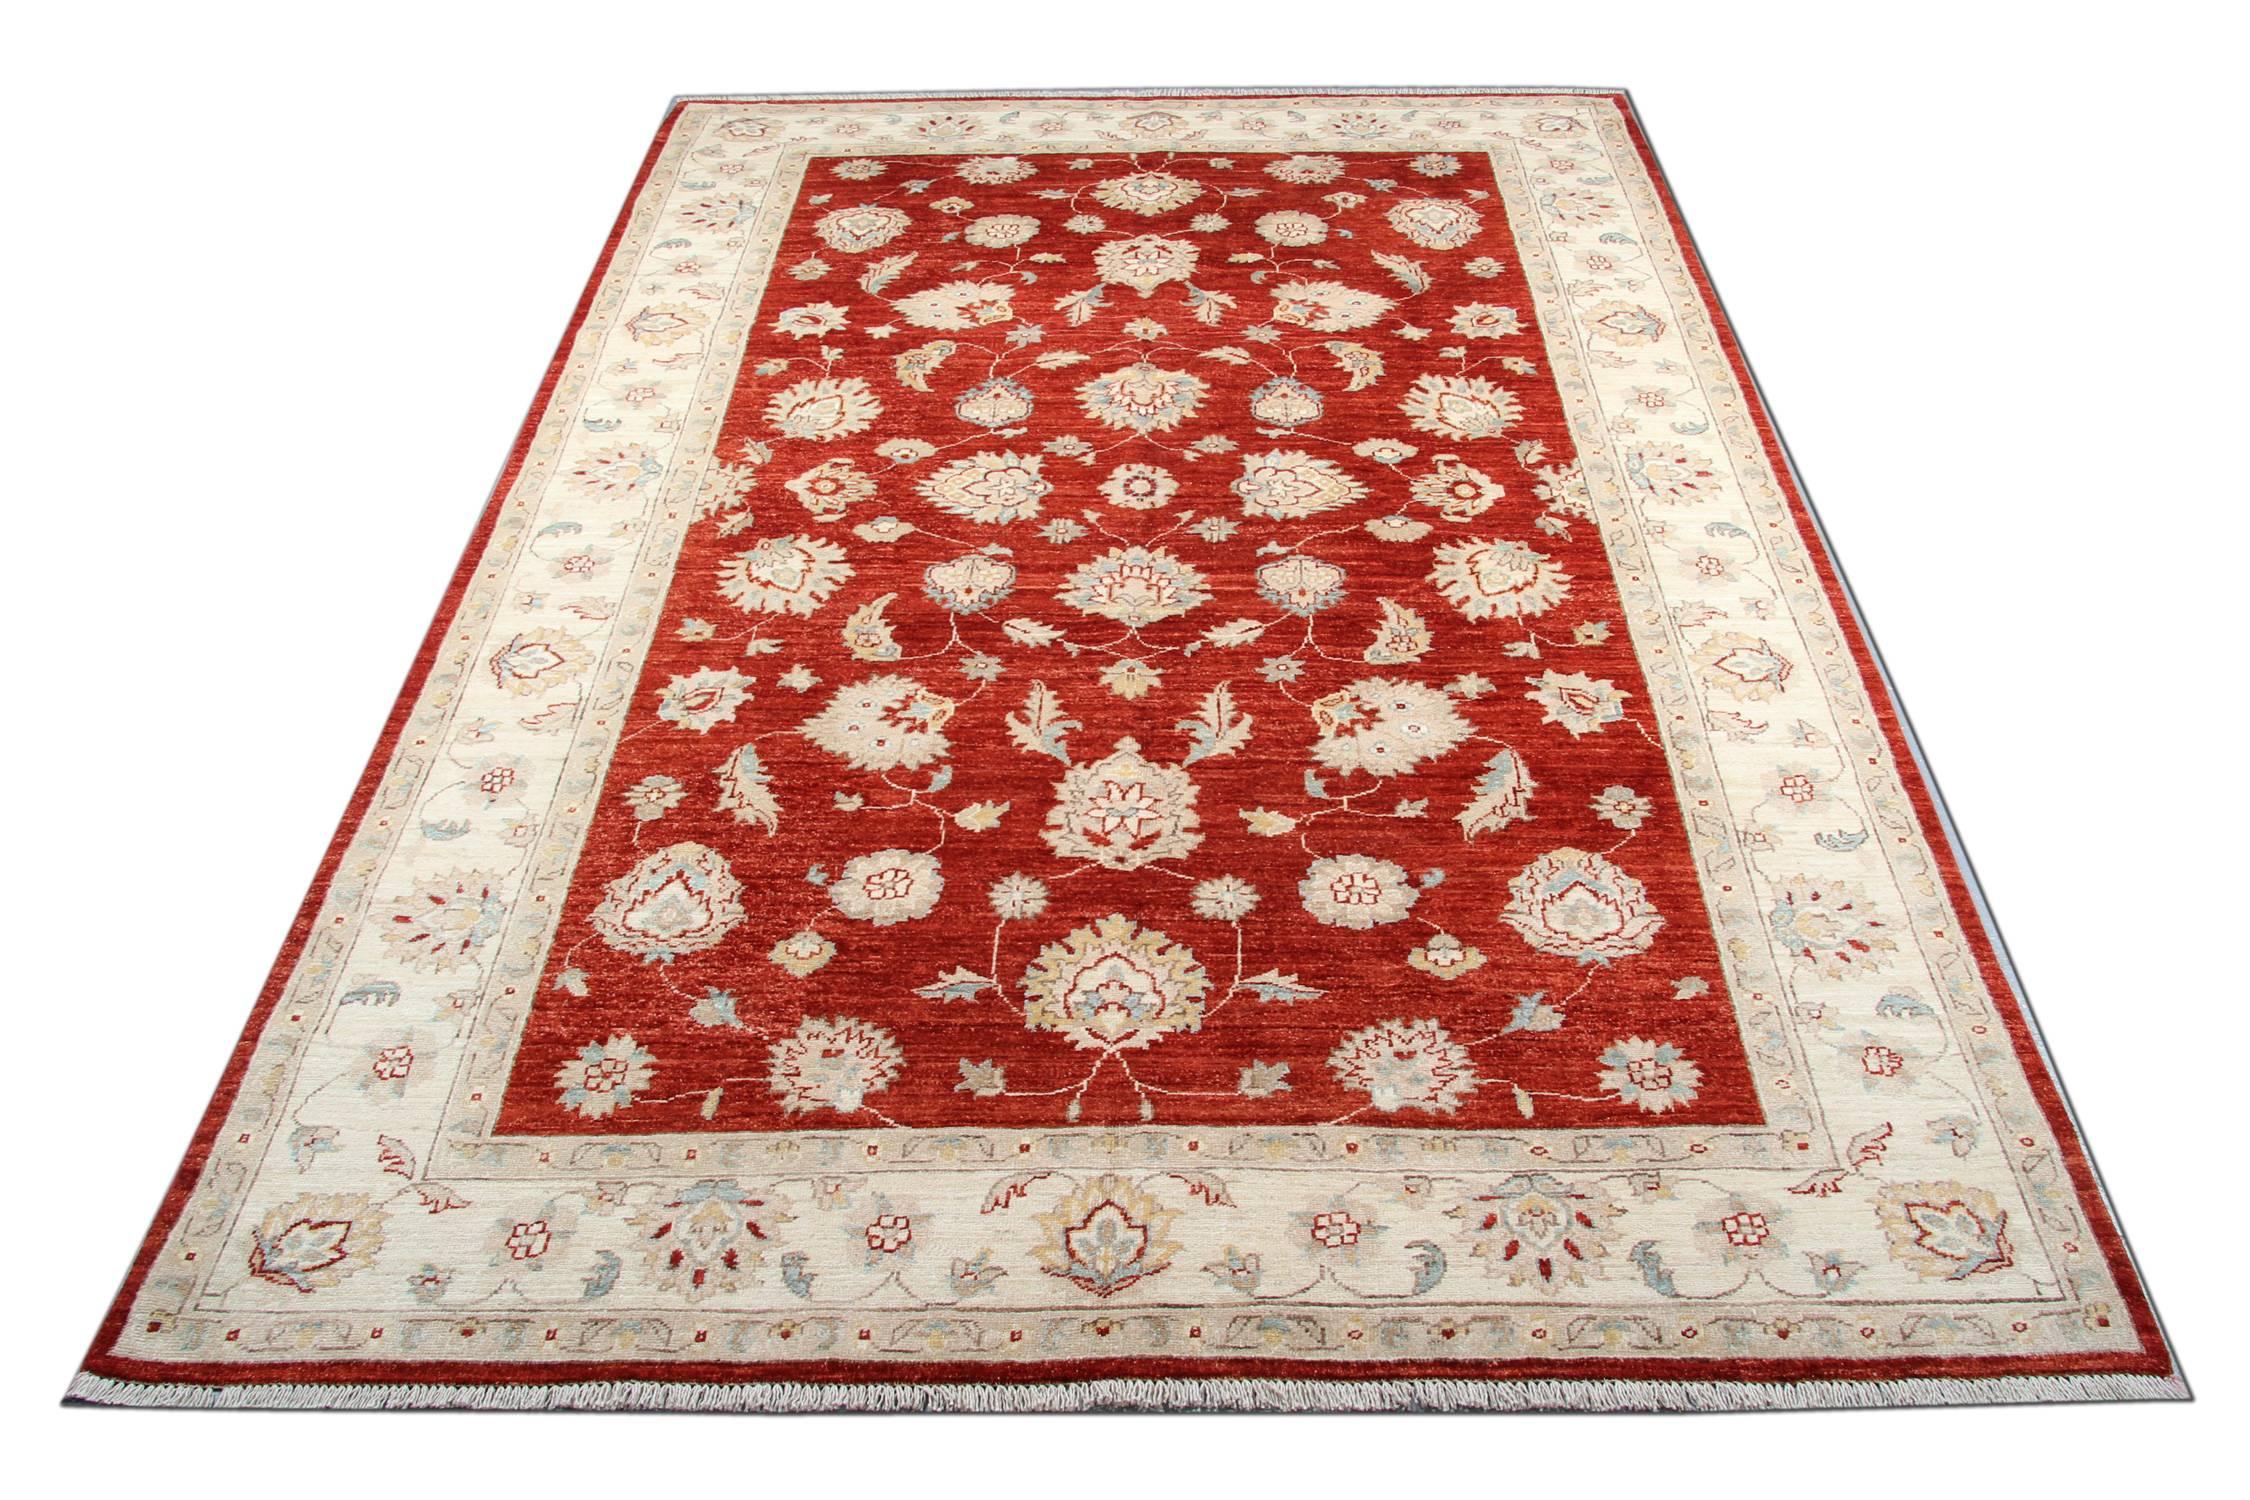 This woven rug is a Ziegler Sultanabad carpet rug made on our looms by our master weavers in Afghanistan. These handmade rugs have been made with all natural veg dyes and hand spun wool. The large-scale design makes Sultanabad wool rugs regarded as